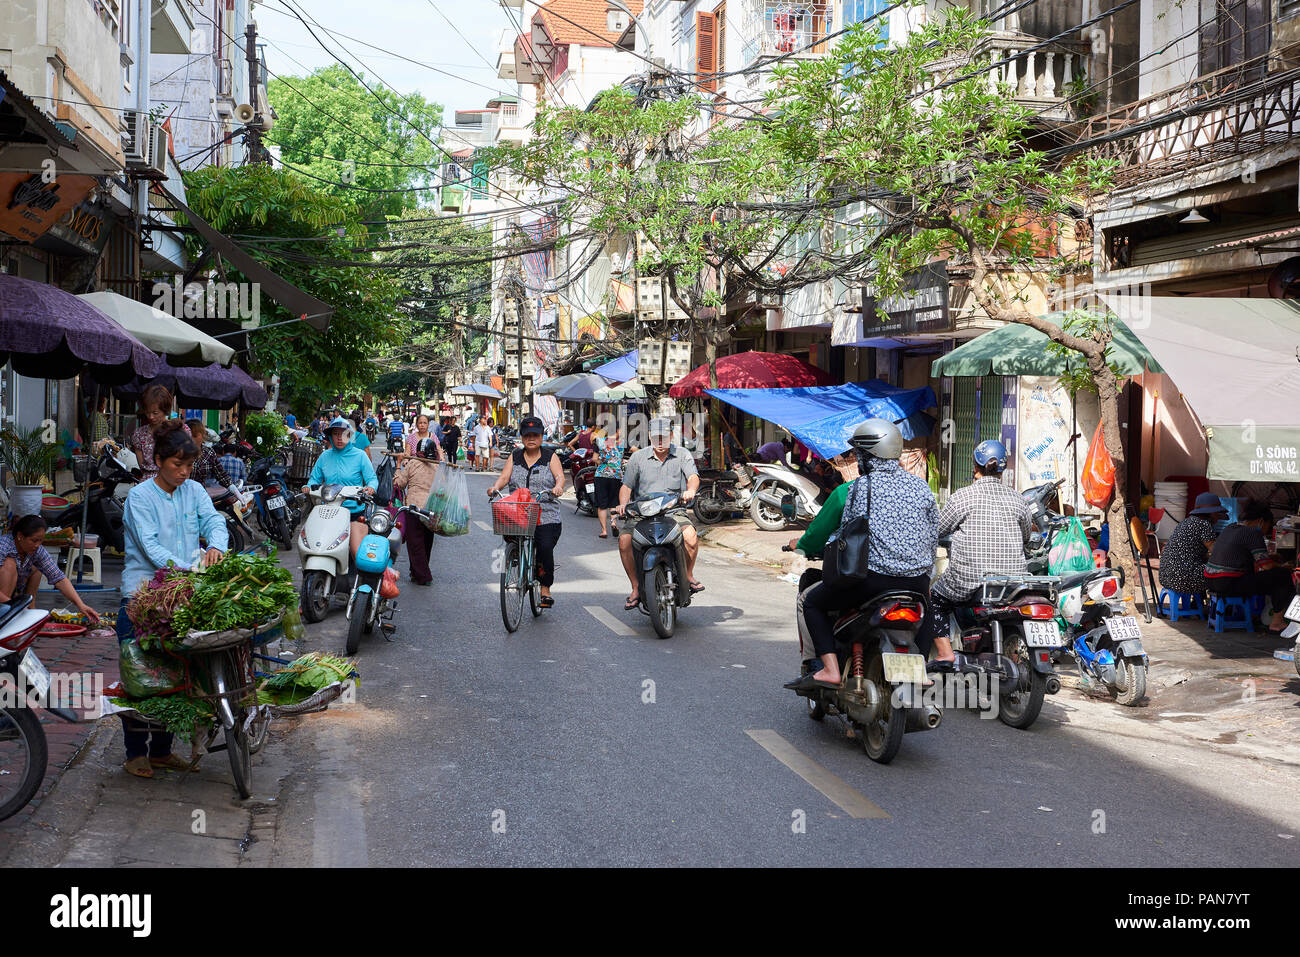 A traditional streert in Hanoi's Old Quarter, Vietnam, with street vendors, cyclists and moped riders. Stock Photo